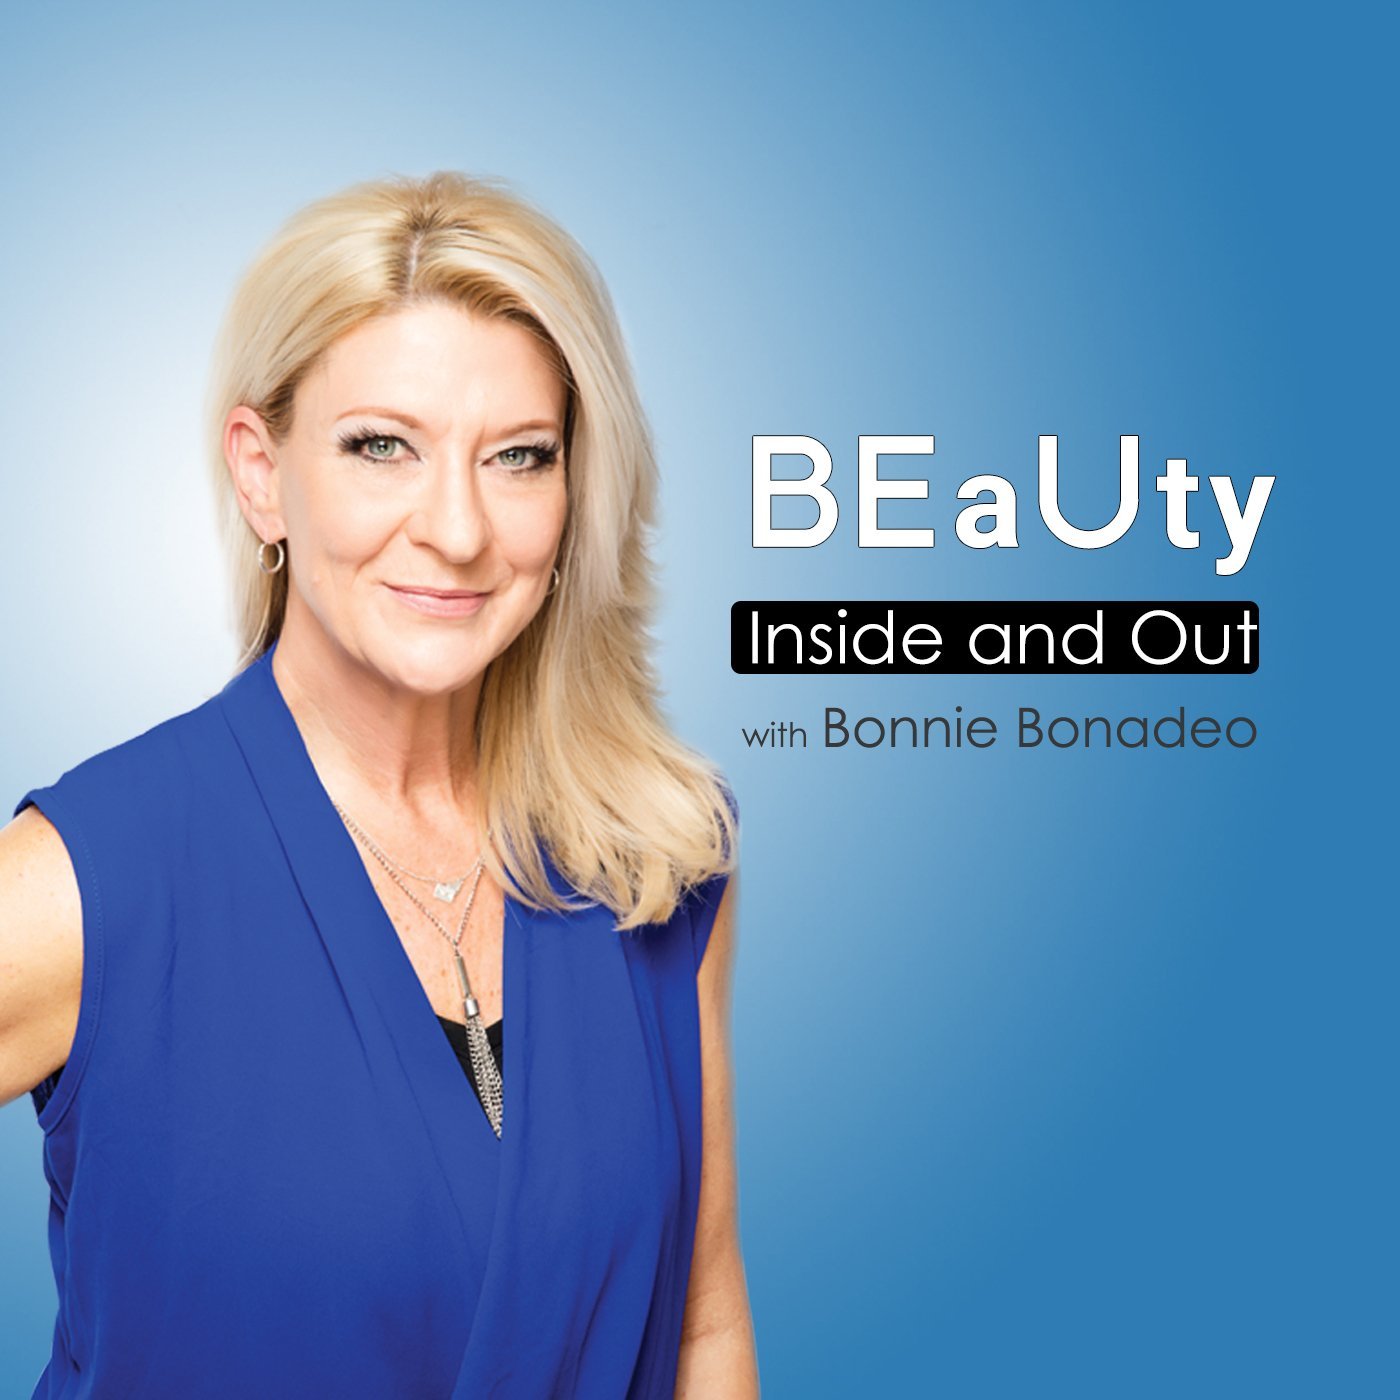 Intimate Health and BEaUty (BEaUty Inside and Out) - Joylux